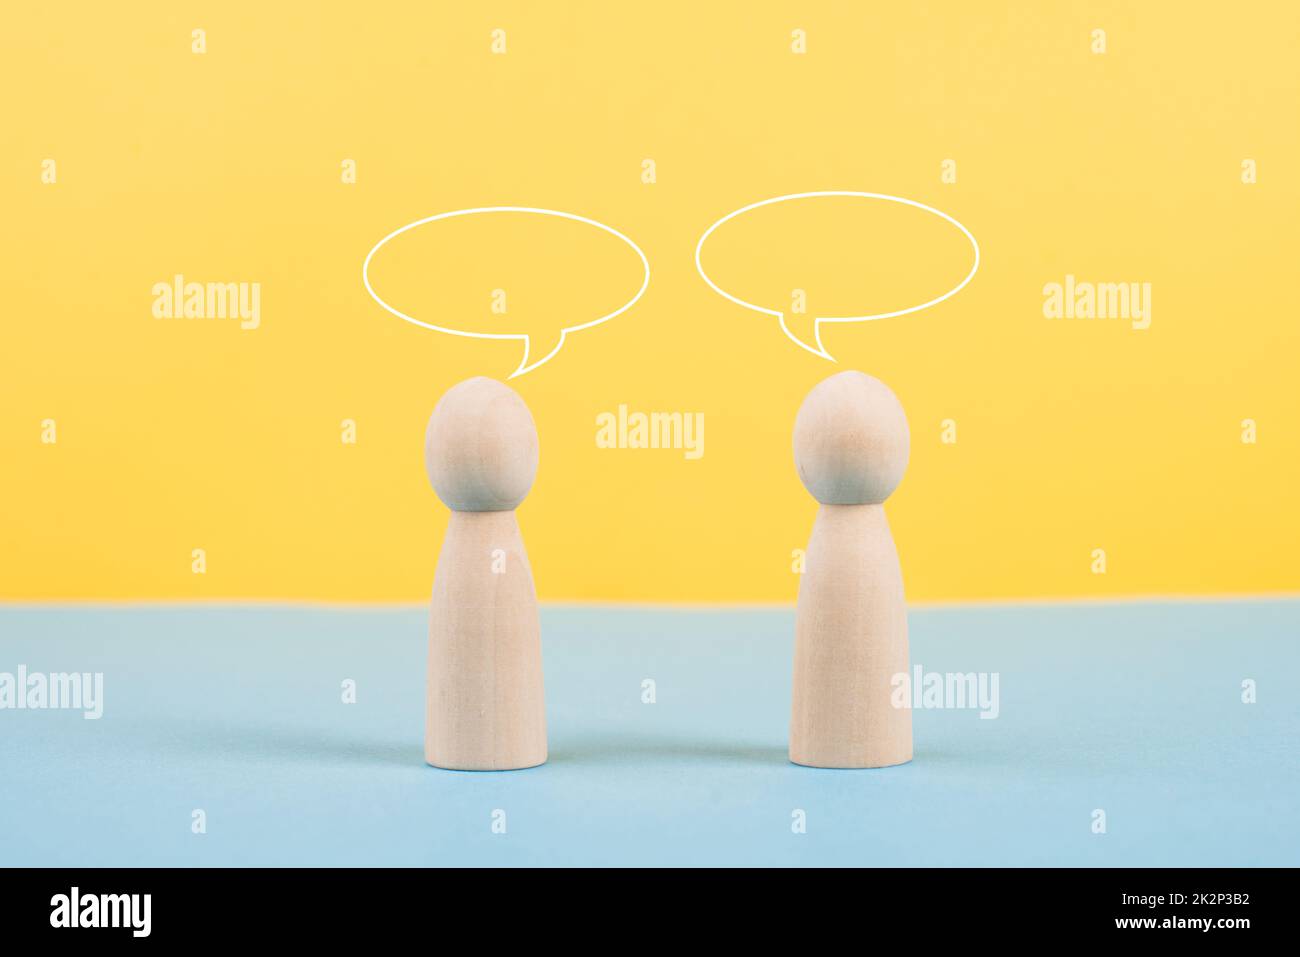 Two people talking together, empty speech bubbles, having a conversation, networking and teamwork concept, social issue Stock Photo